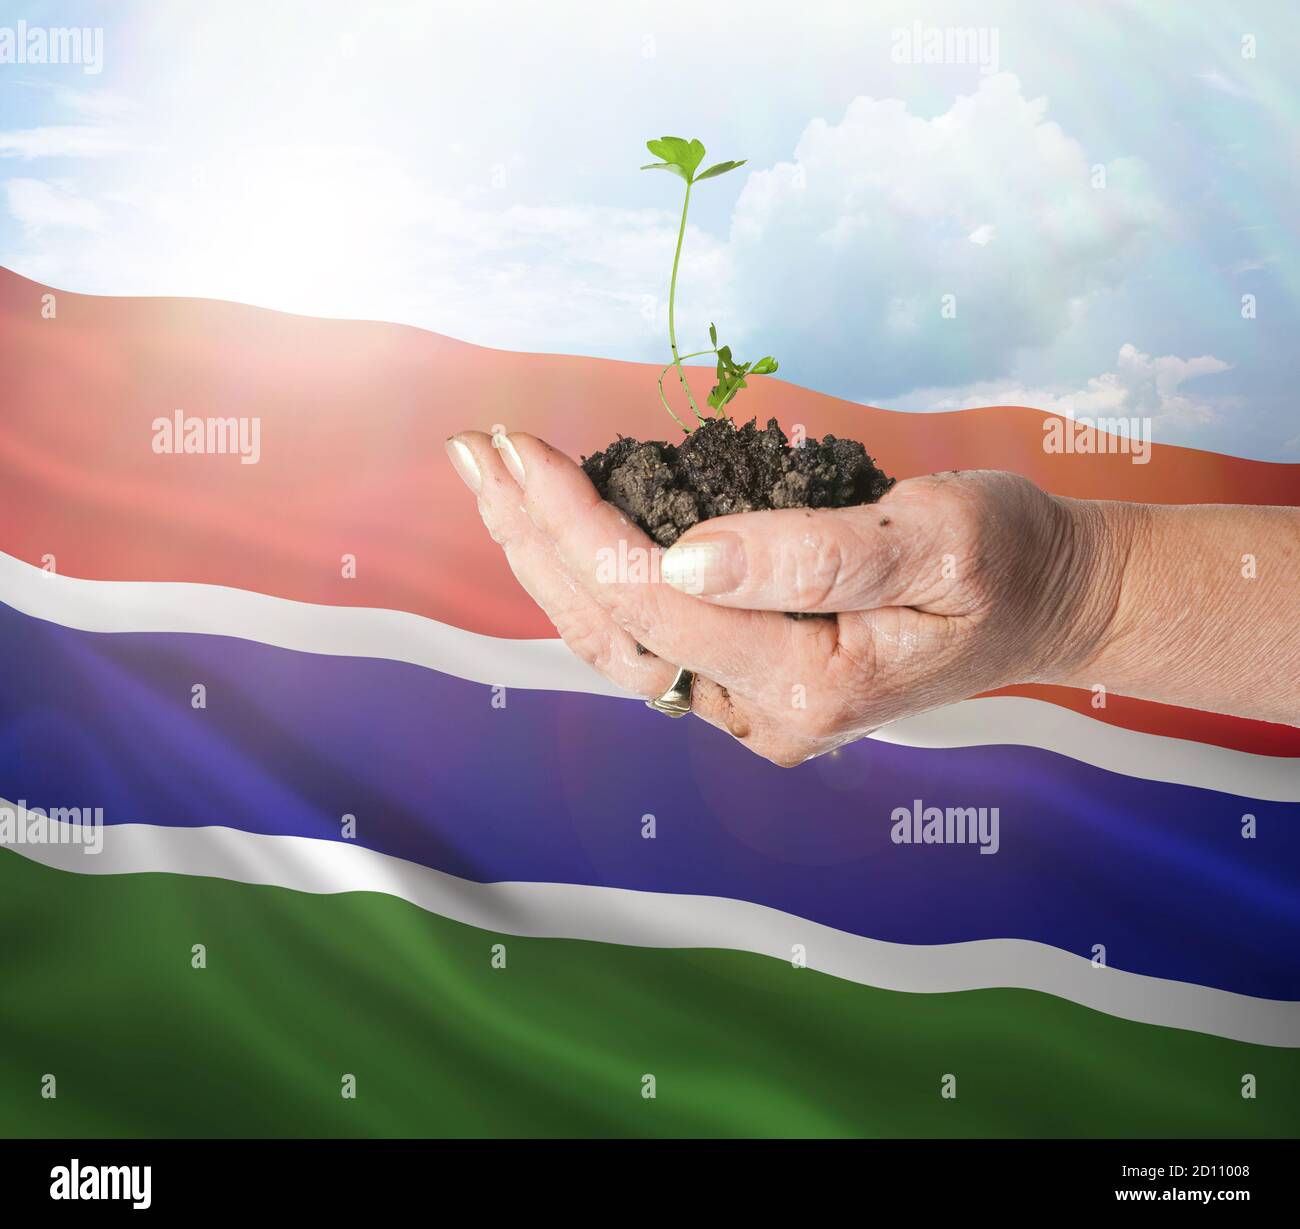 Gambia growth and new beginning. Green renewable energy and ecology concept. Hand holding young plant. Stock Photo